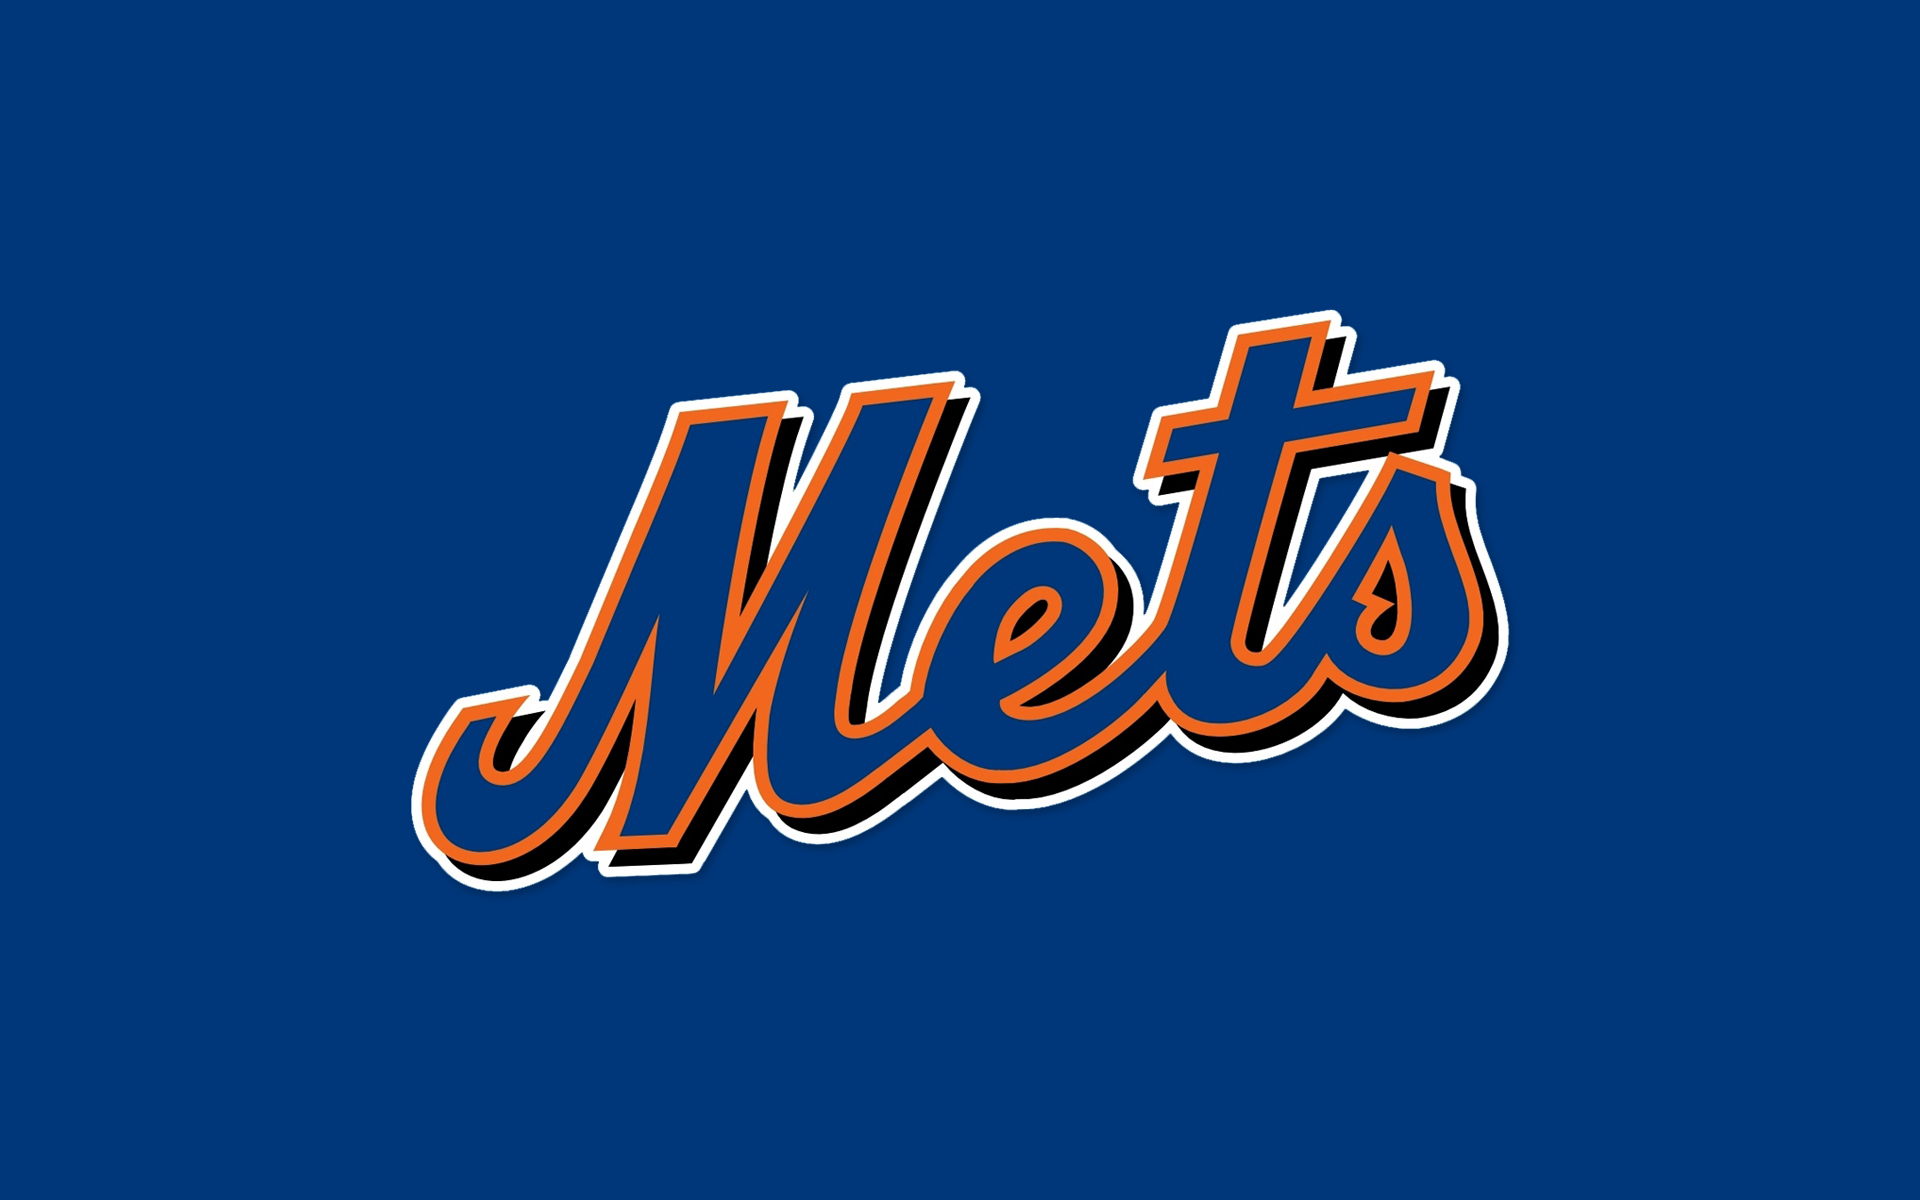 New York Mets wallpapers New York Mets background   Page 5